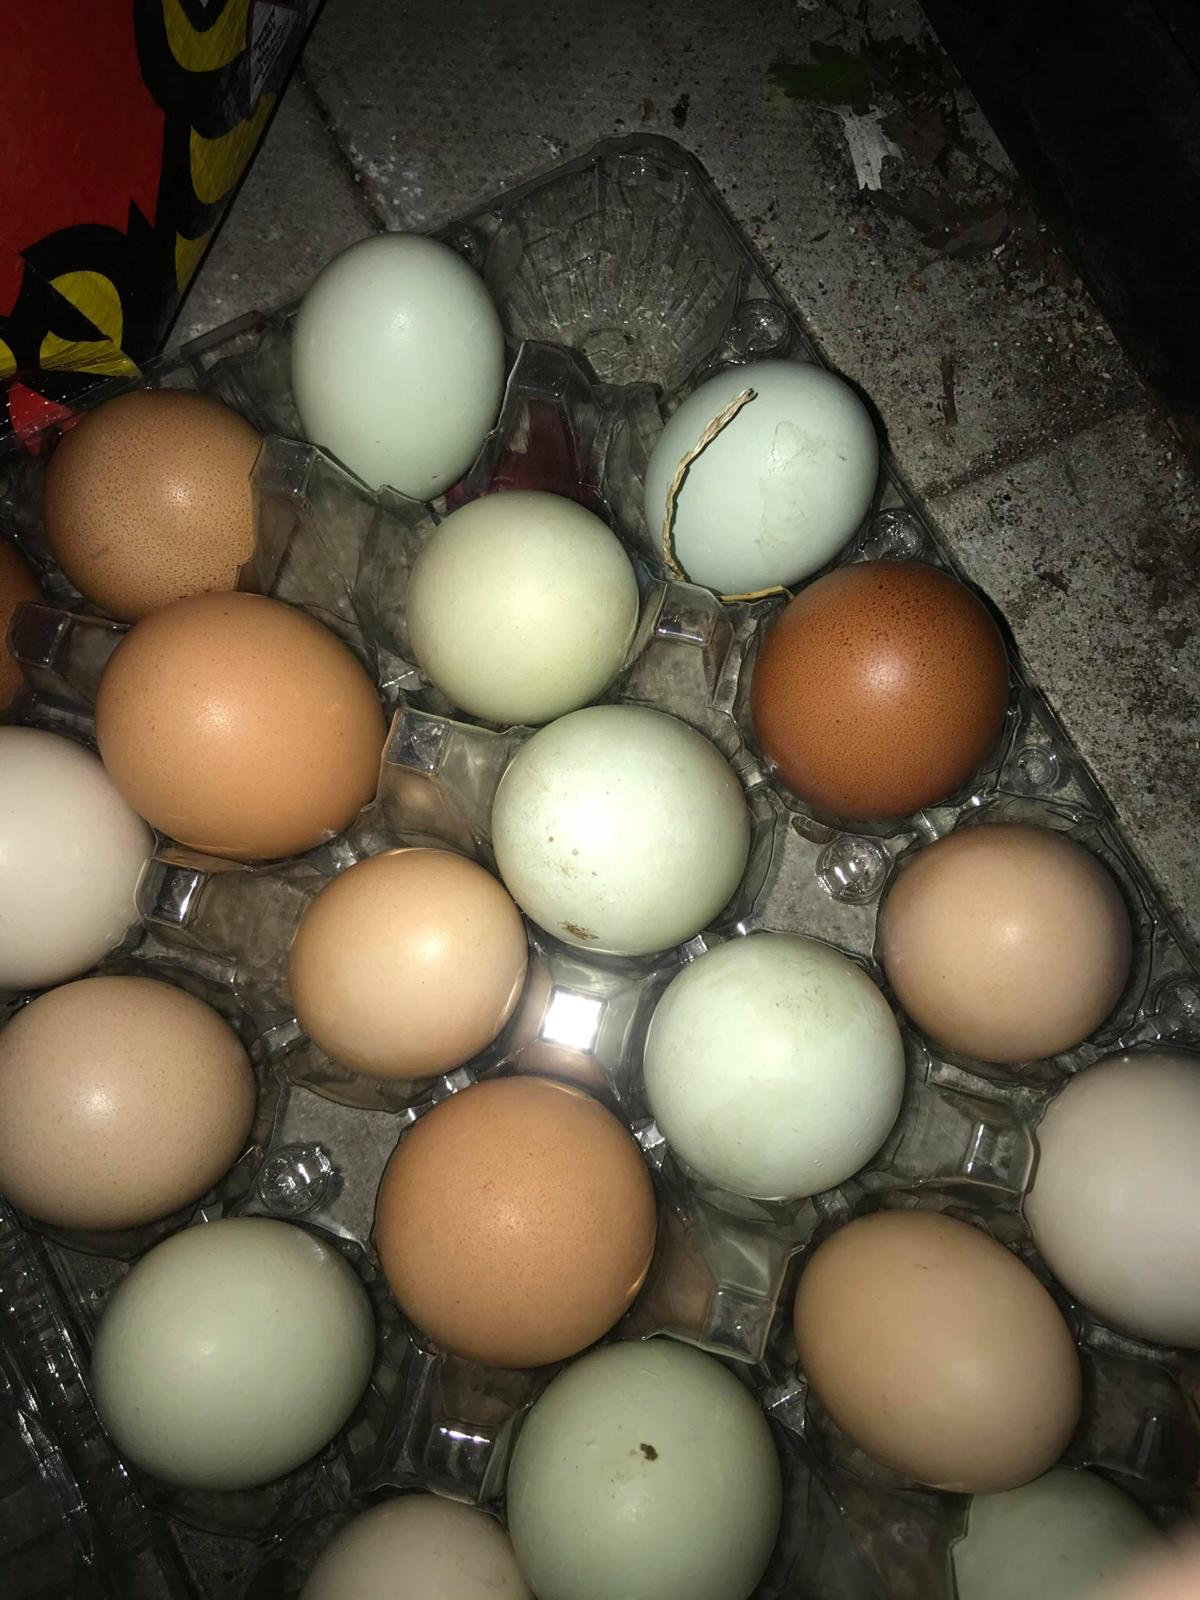 A family grew vegetables and kept chickens during lockdown 1